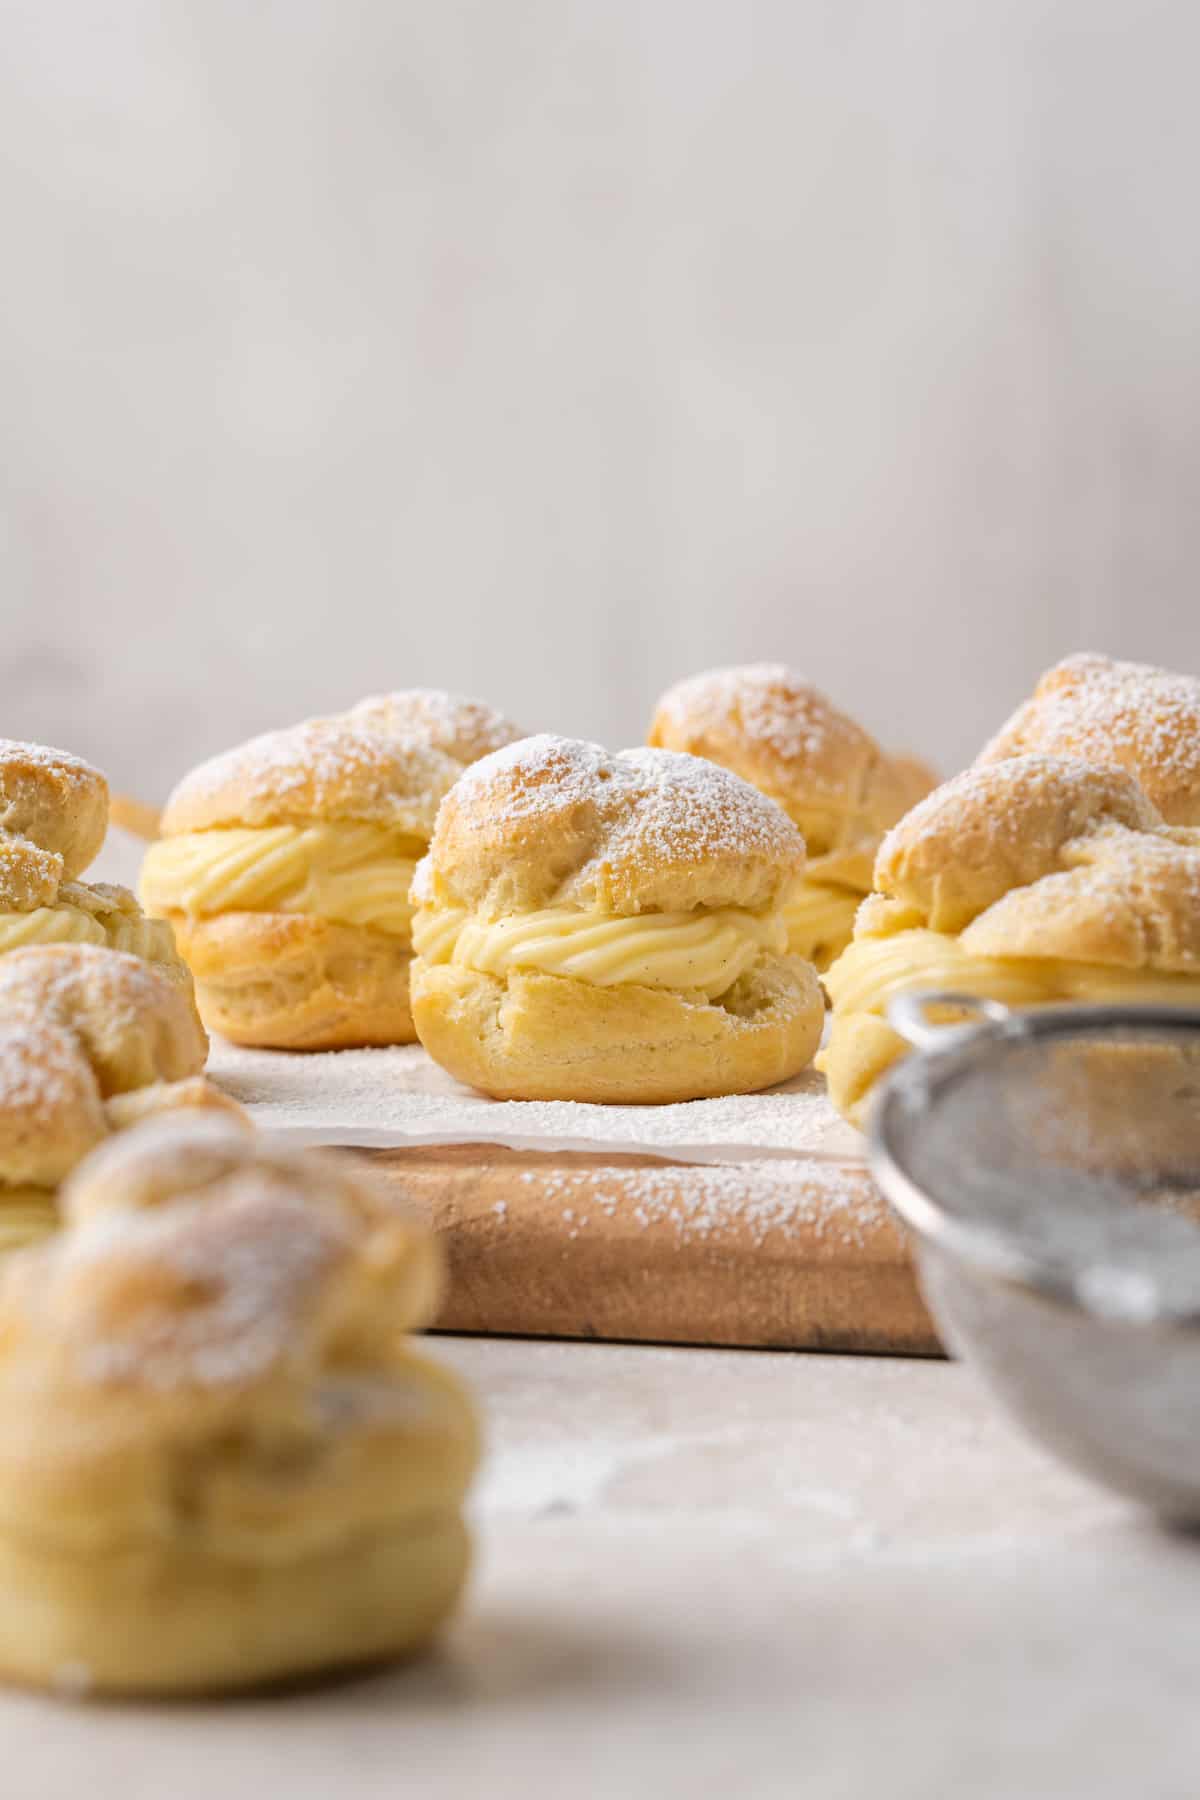 Assorted gluten-free cream puffs filled with vanilla pastry cream and dusted with powdered sugar on a parchment-lined wooden board, with a mesh sieve in the foreground.